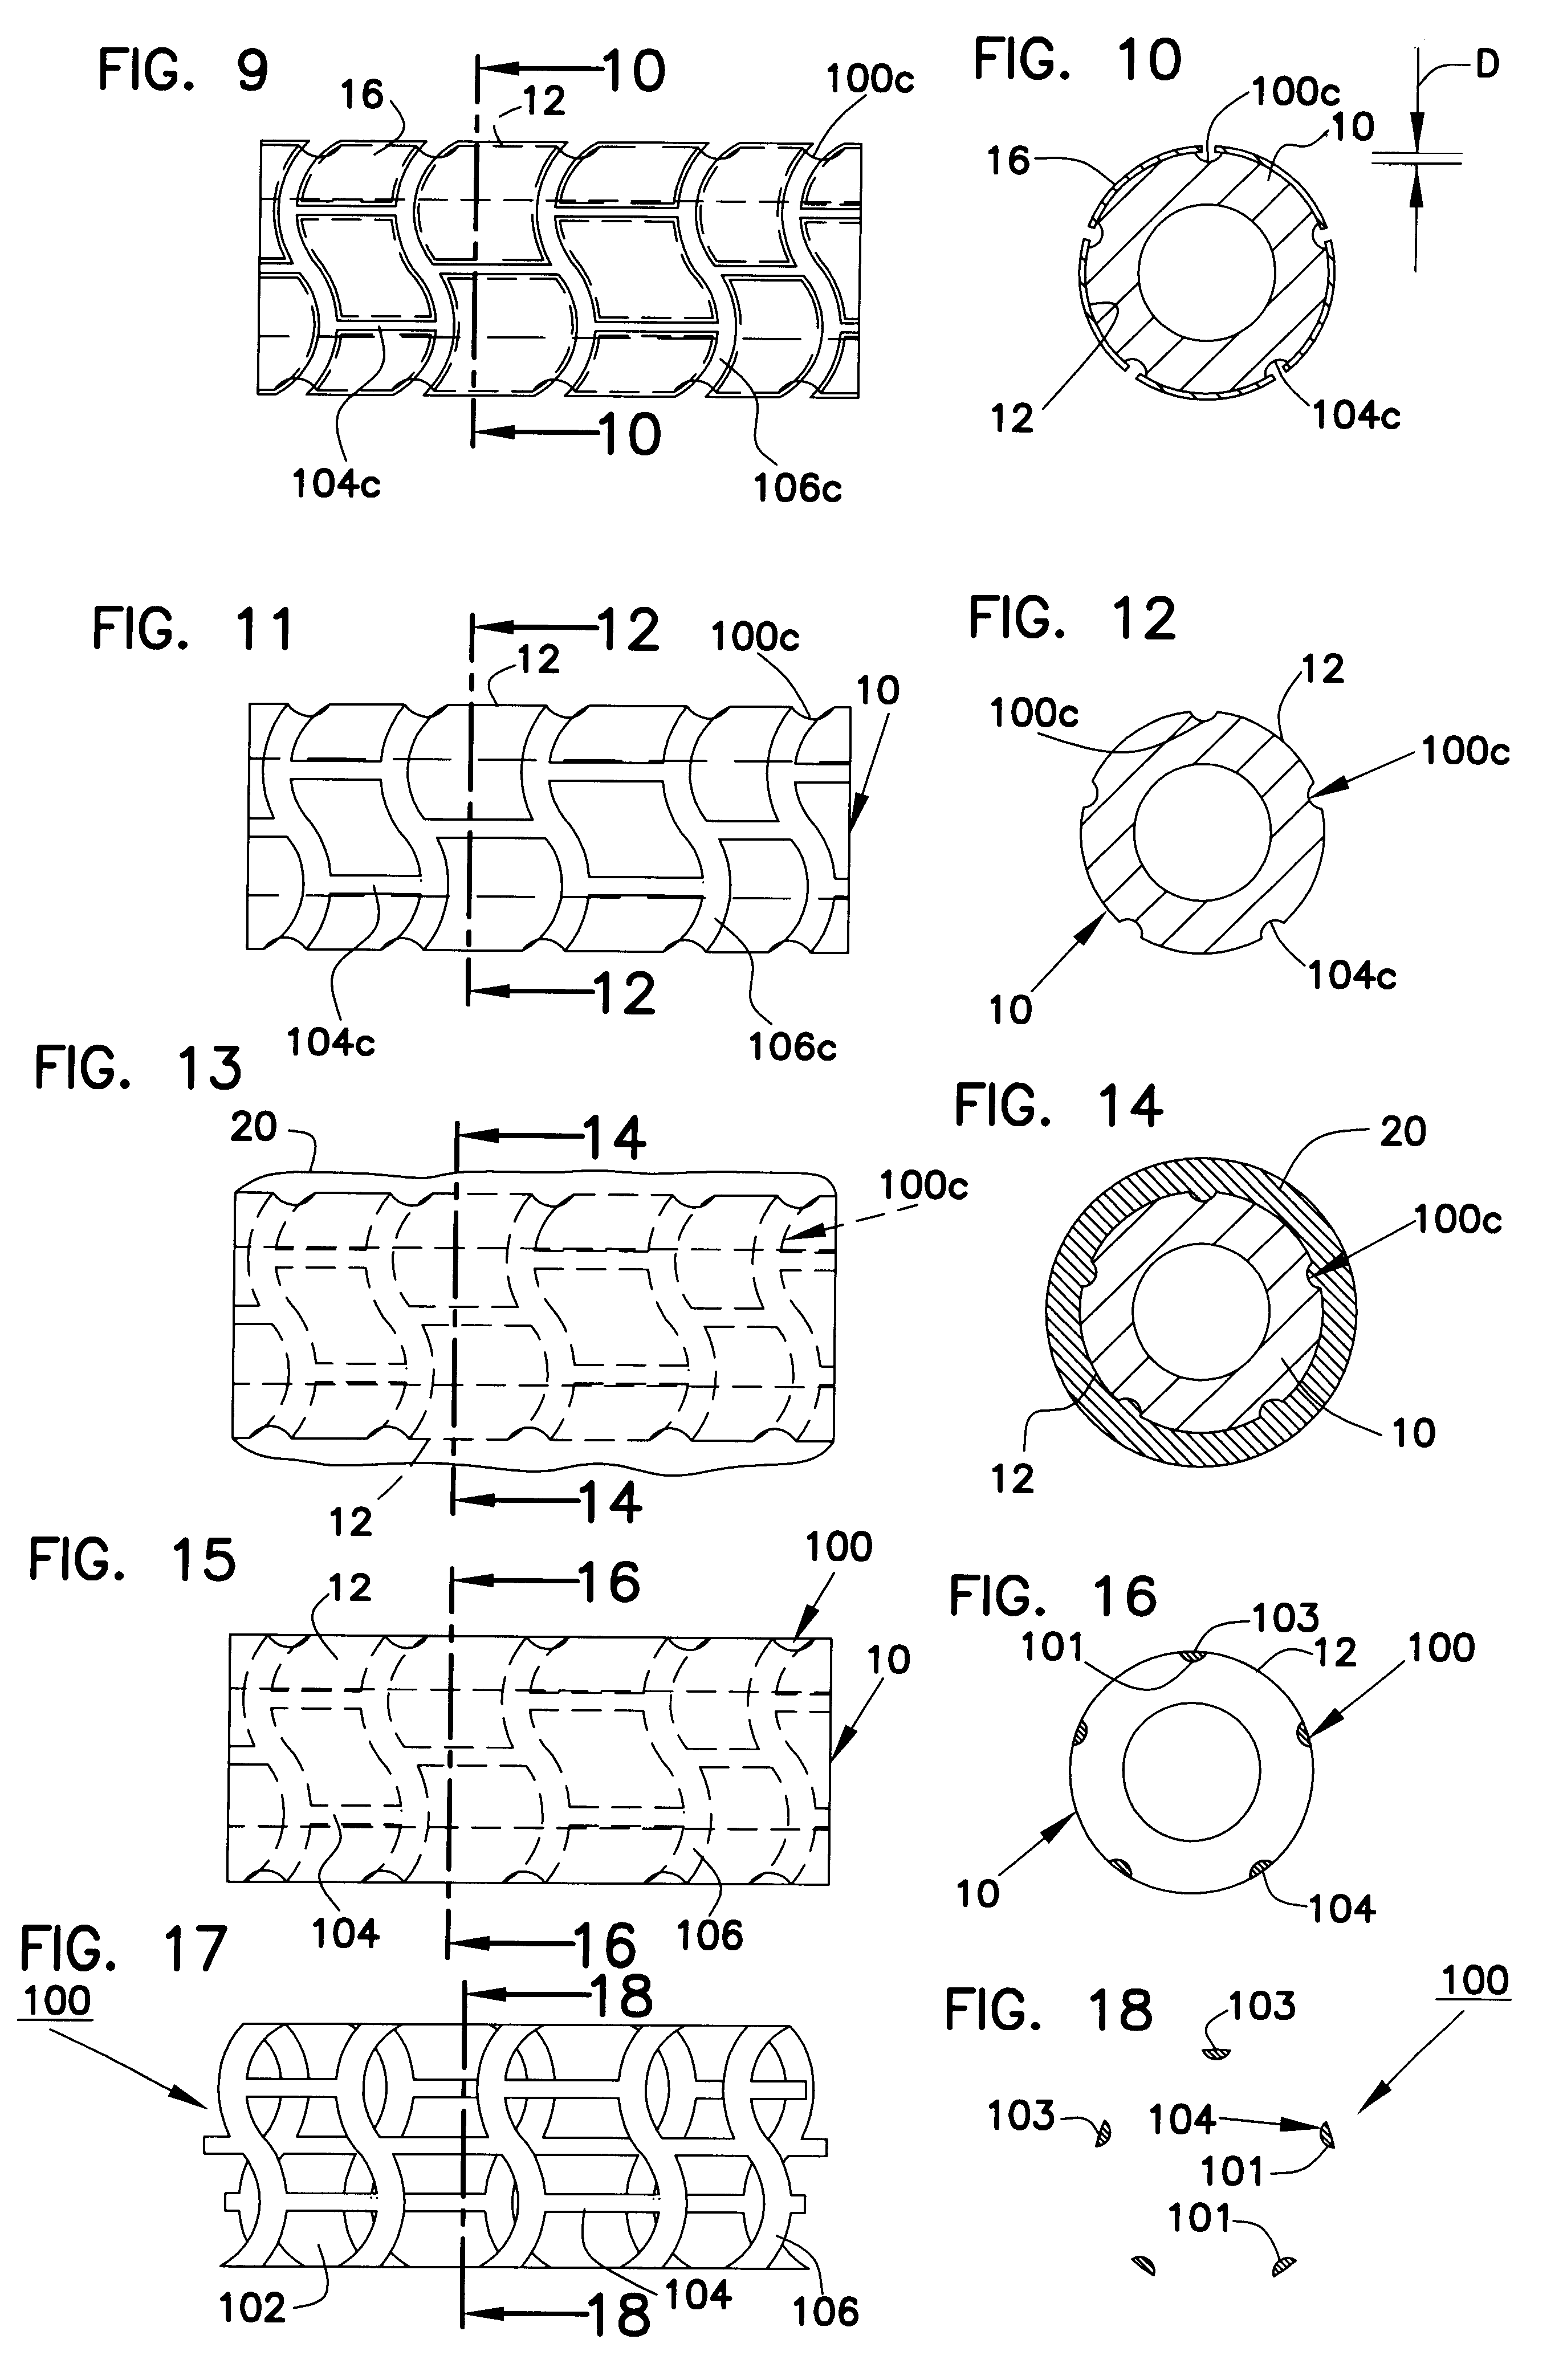 Method for manufacturing intraluminal device